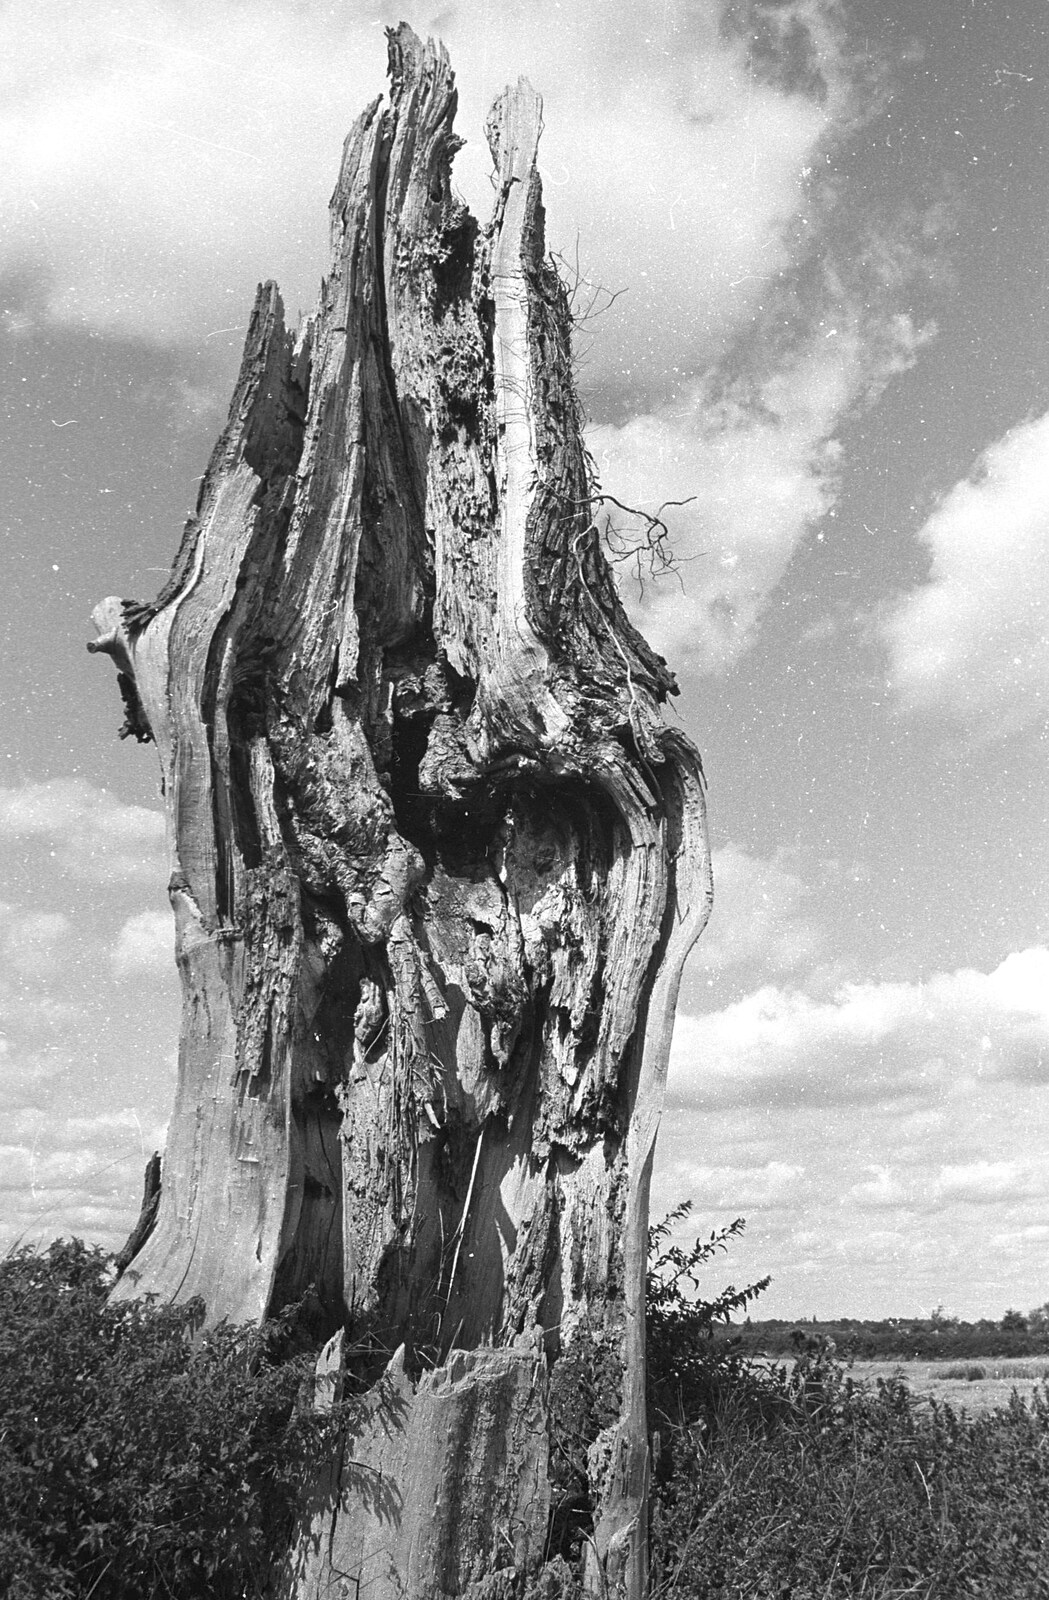 A Black and White Life in Concrete, Stuston, Suffolk - 3rd September 1992: The lightning tree, Stuston